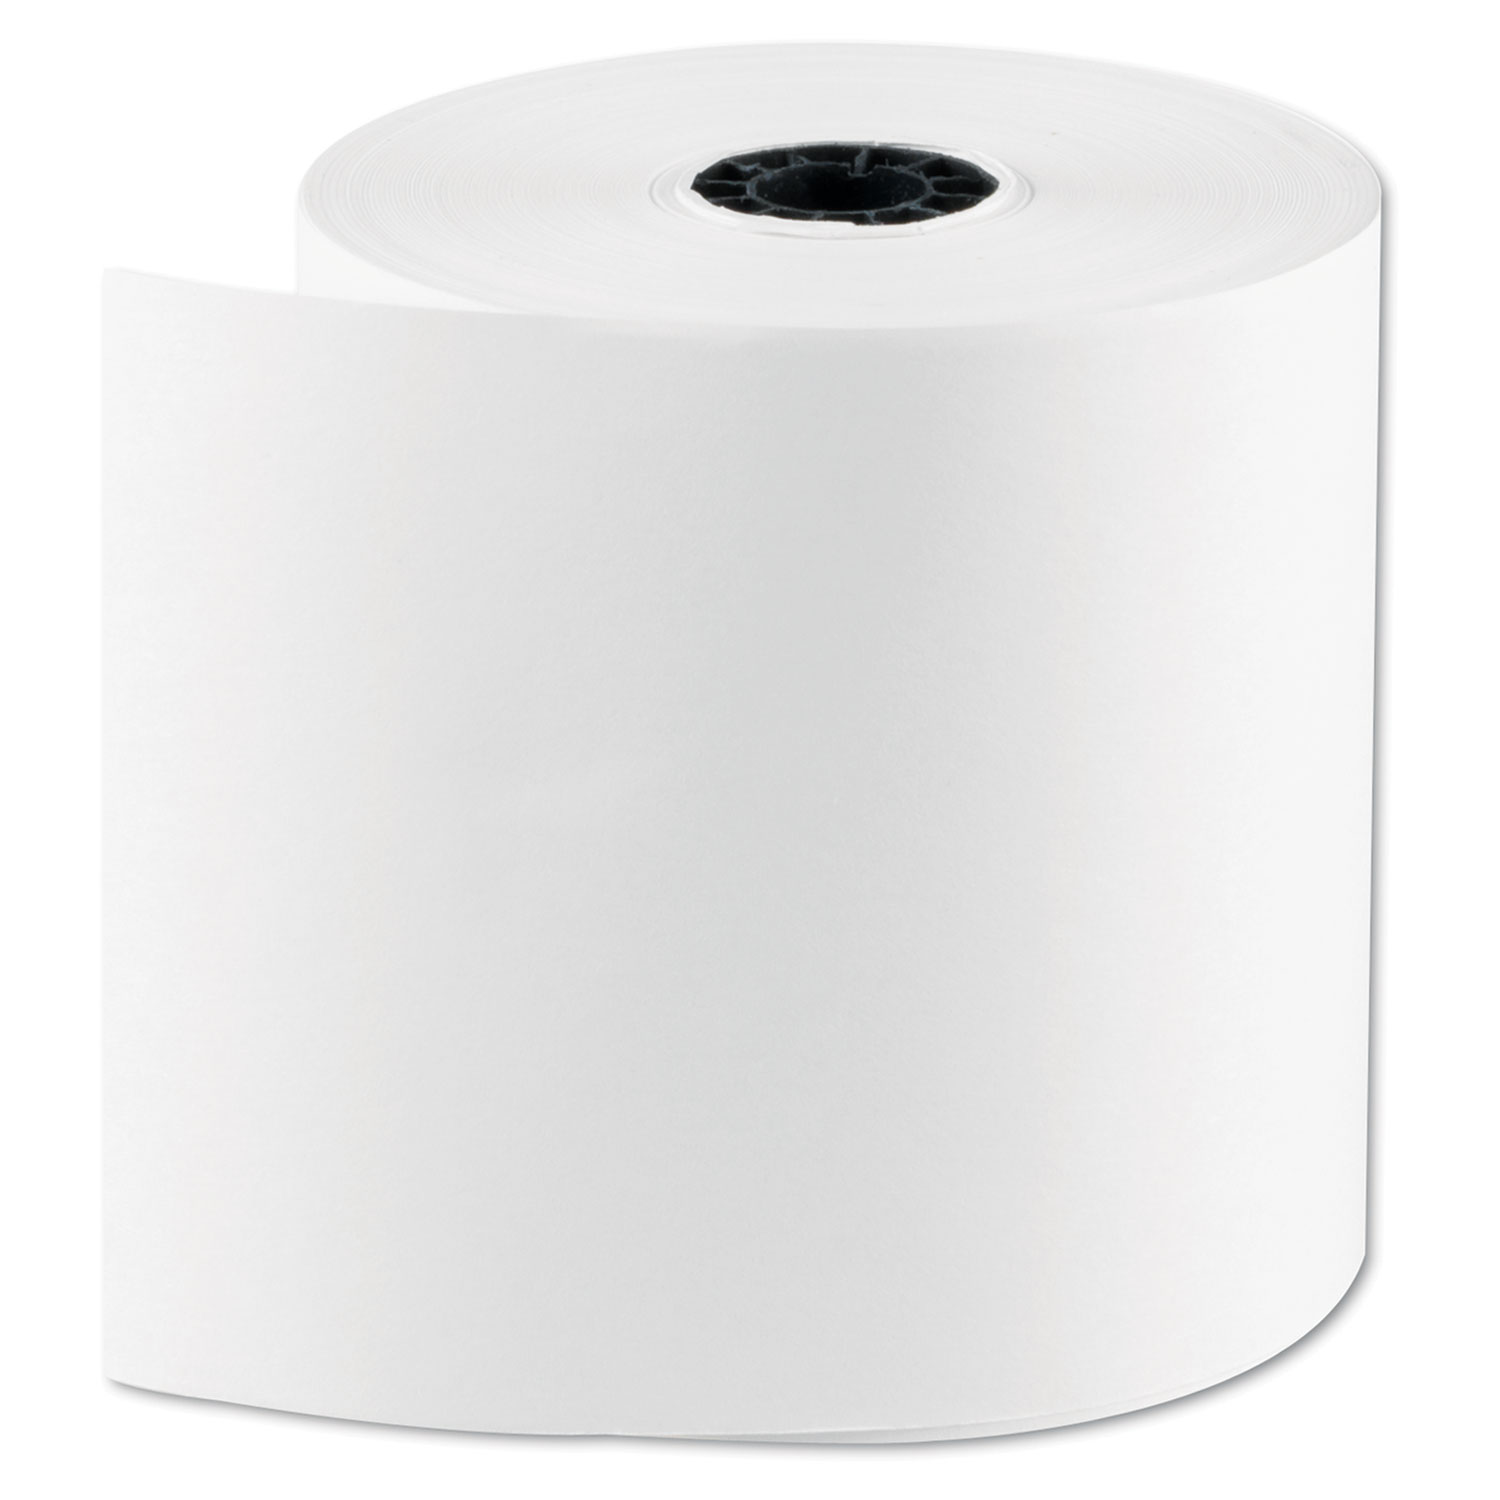  National Checking Company NTC 1300SP RegistRolls Point-of-Sale Rolls, 3 x 165 ft, White, 30/Carton (NTC1300SP) 